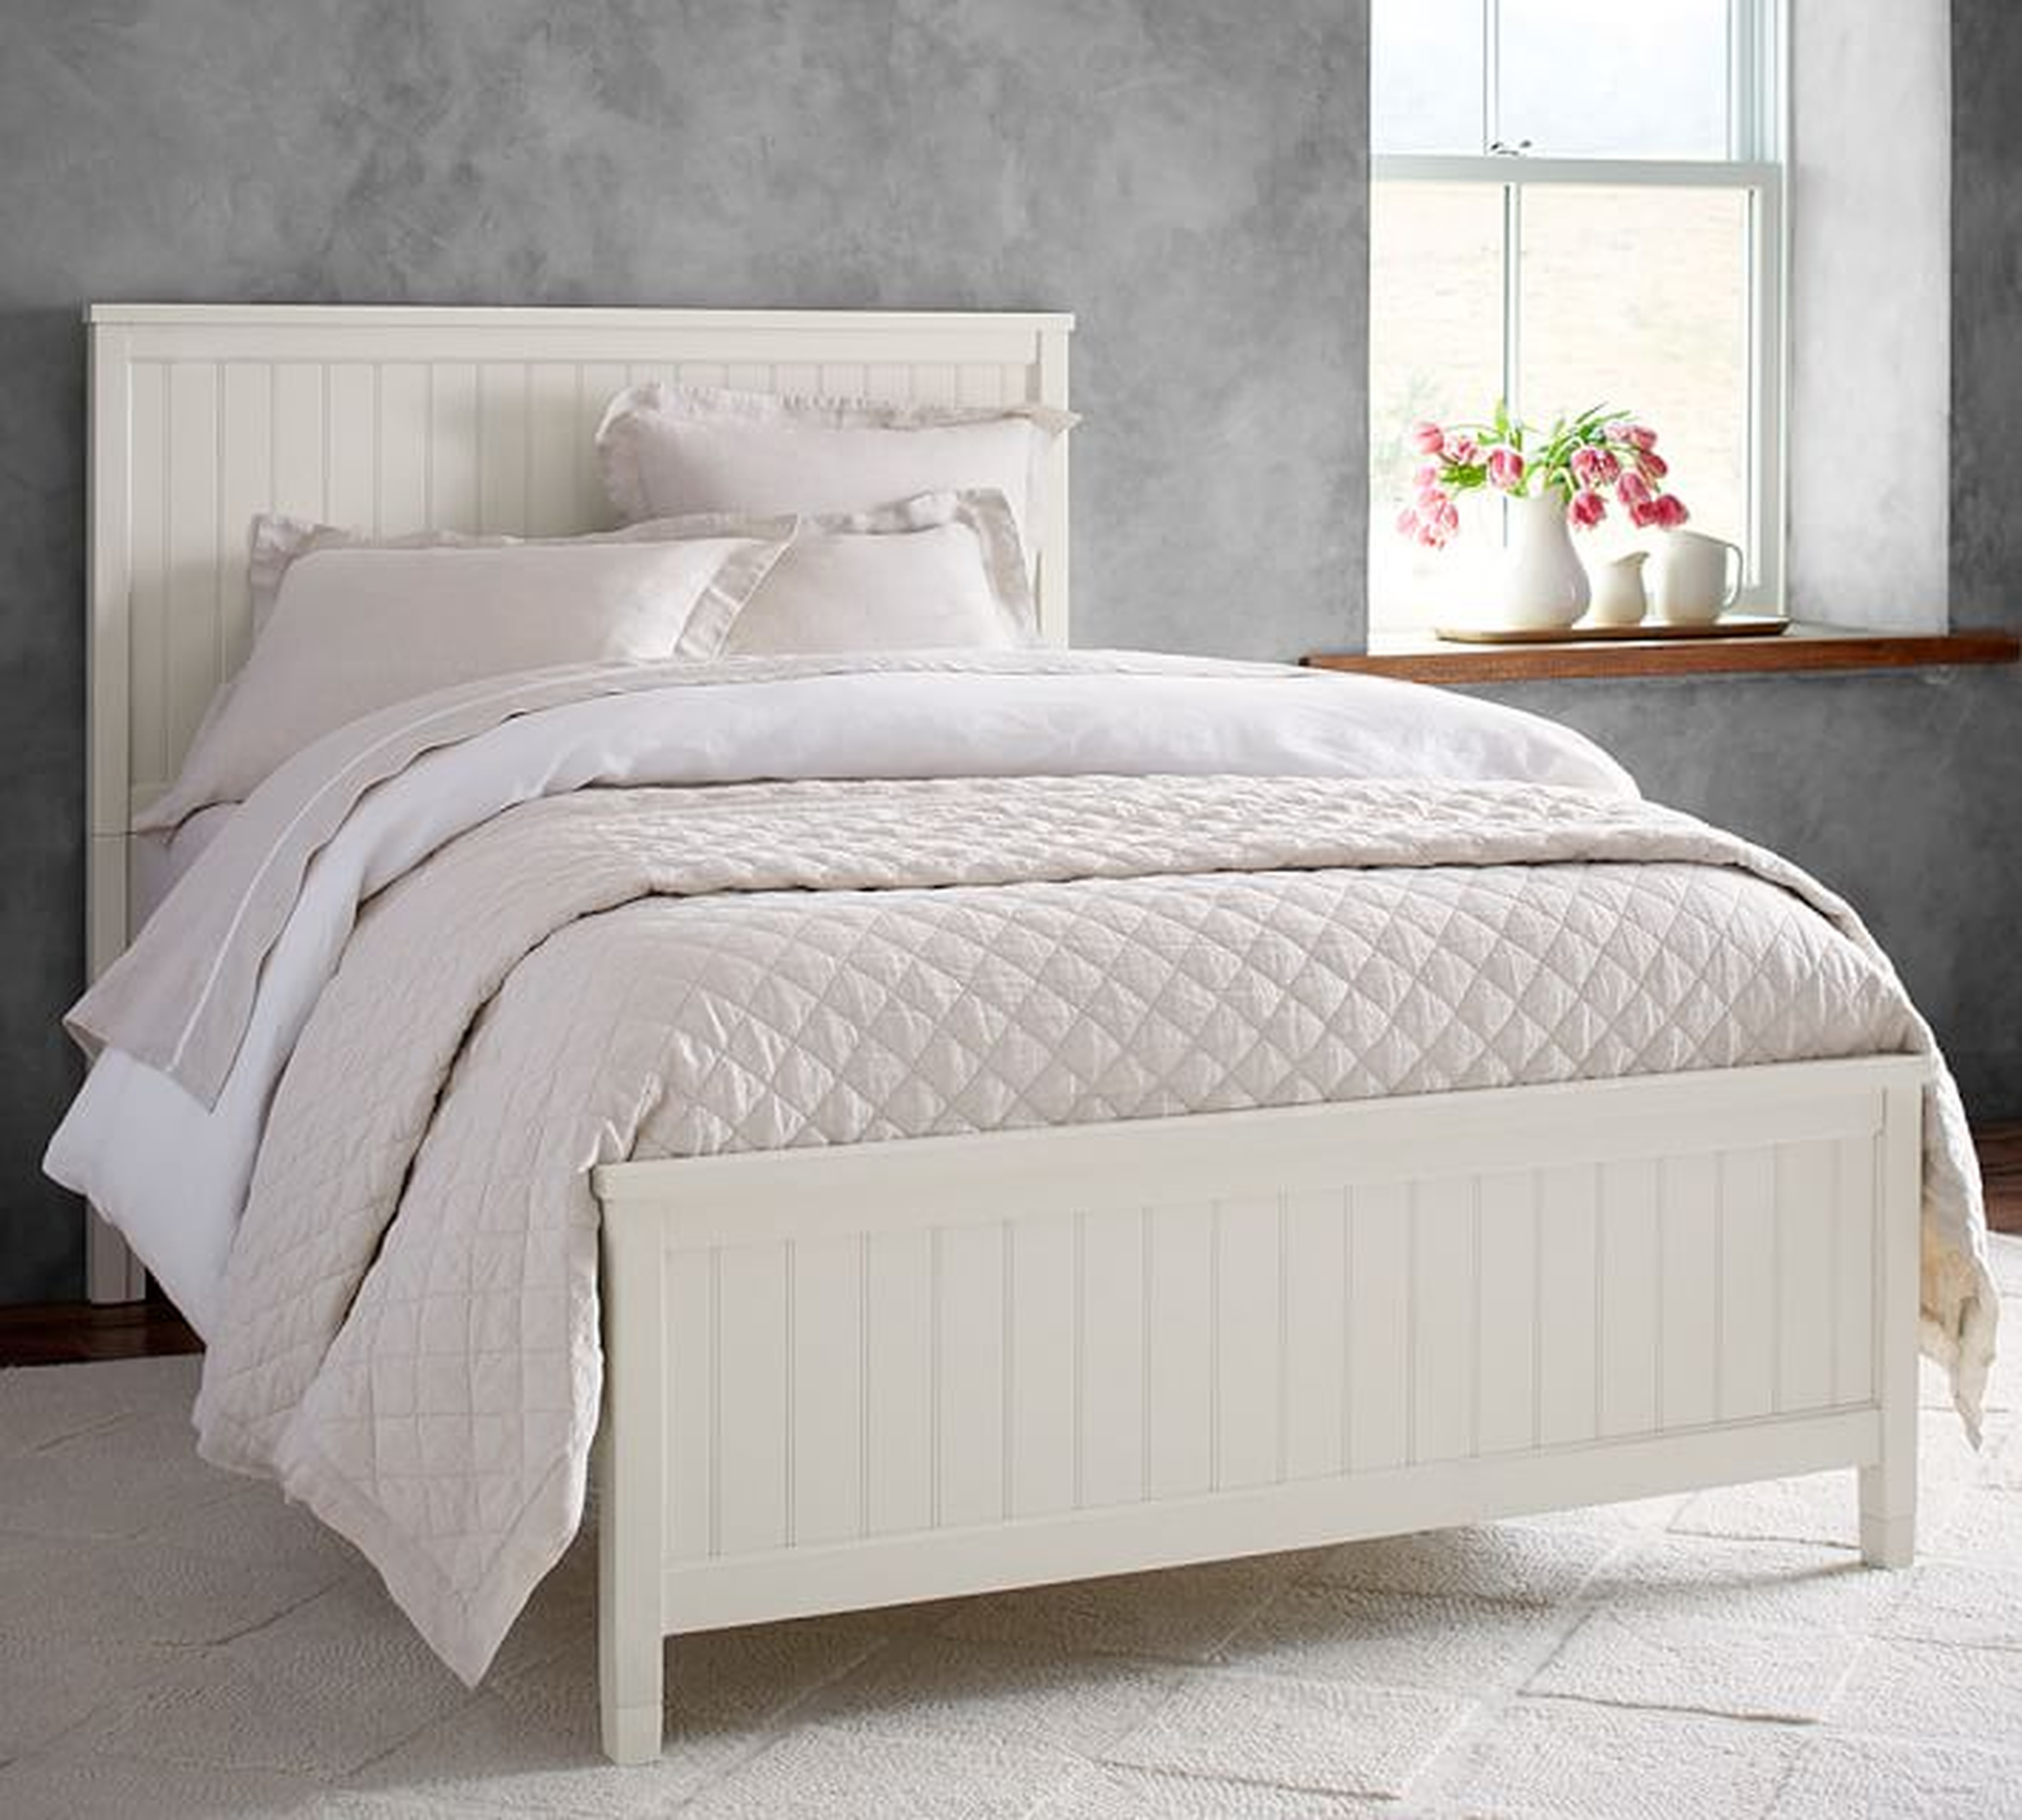 Beadboard Platform Bed, Queen, Simply White - Pottery Barn Teen